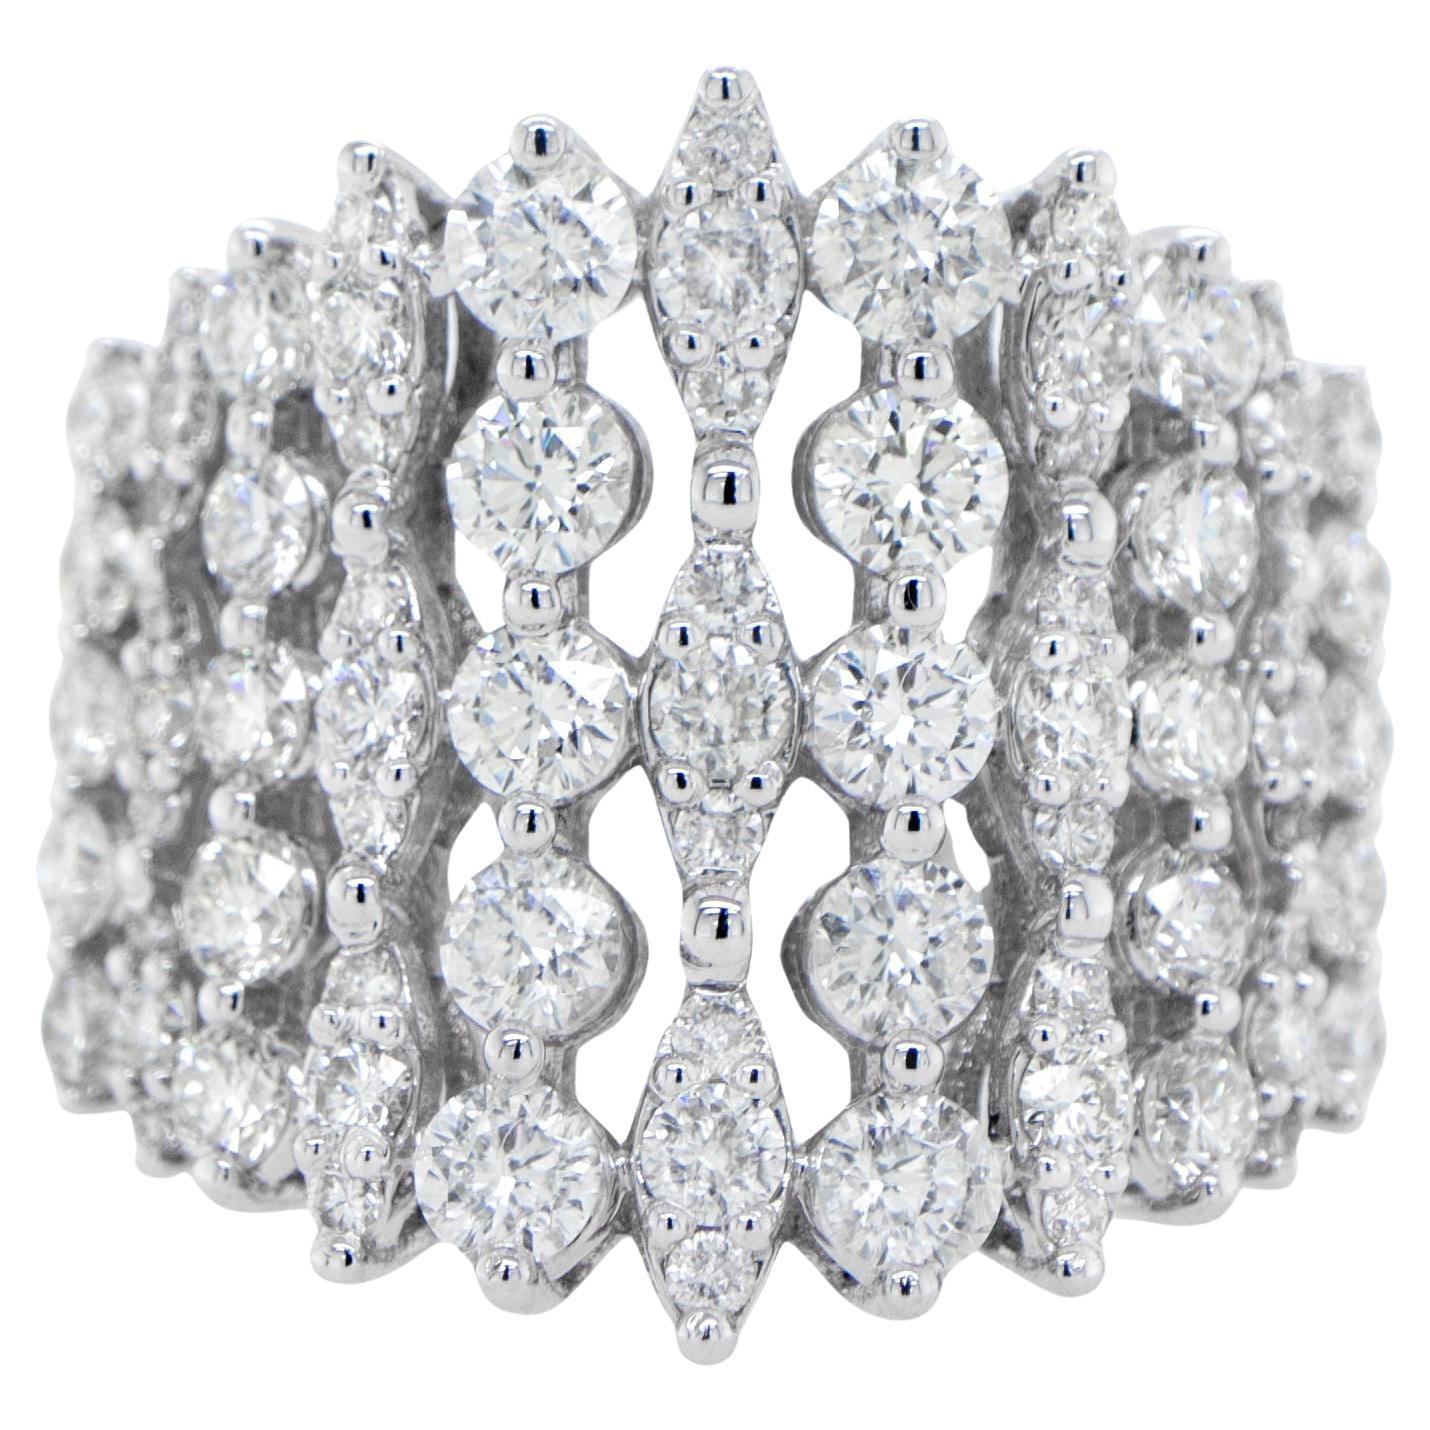 Diamond Cluster Cocktail Ring 2.1 Carats 18K White Gold